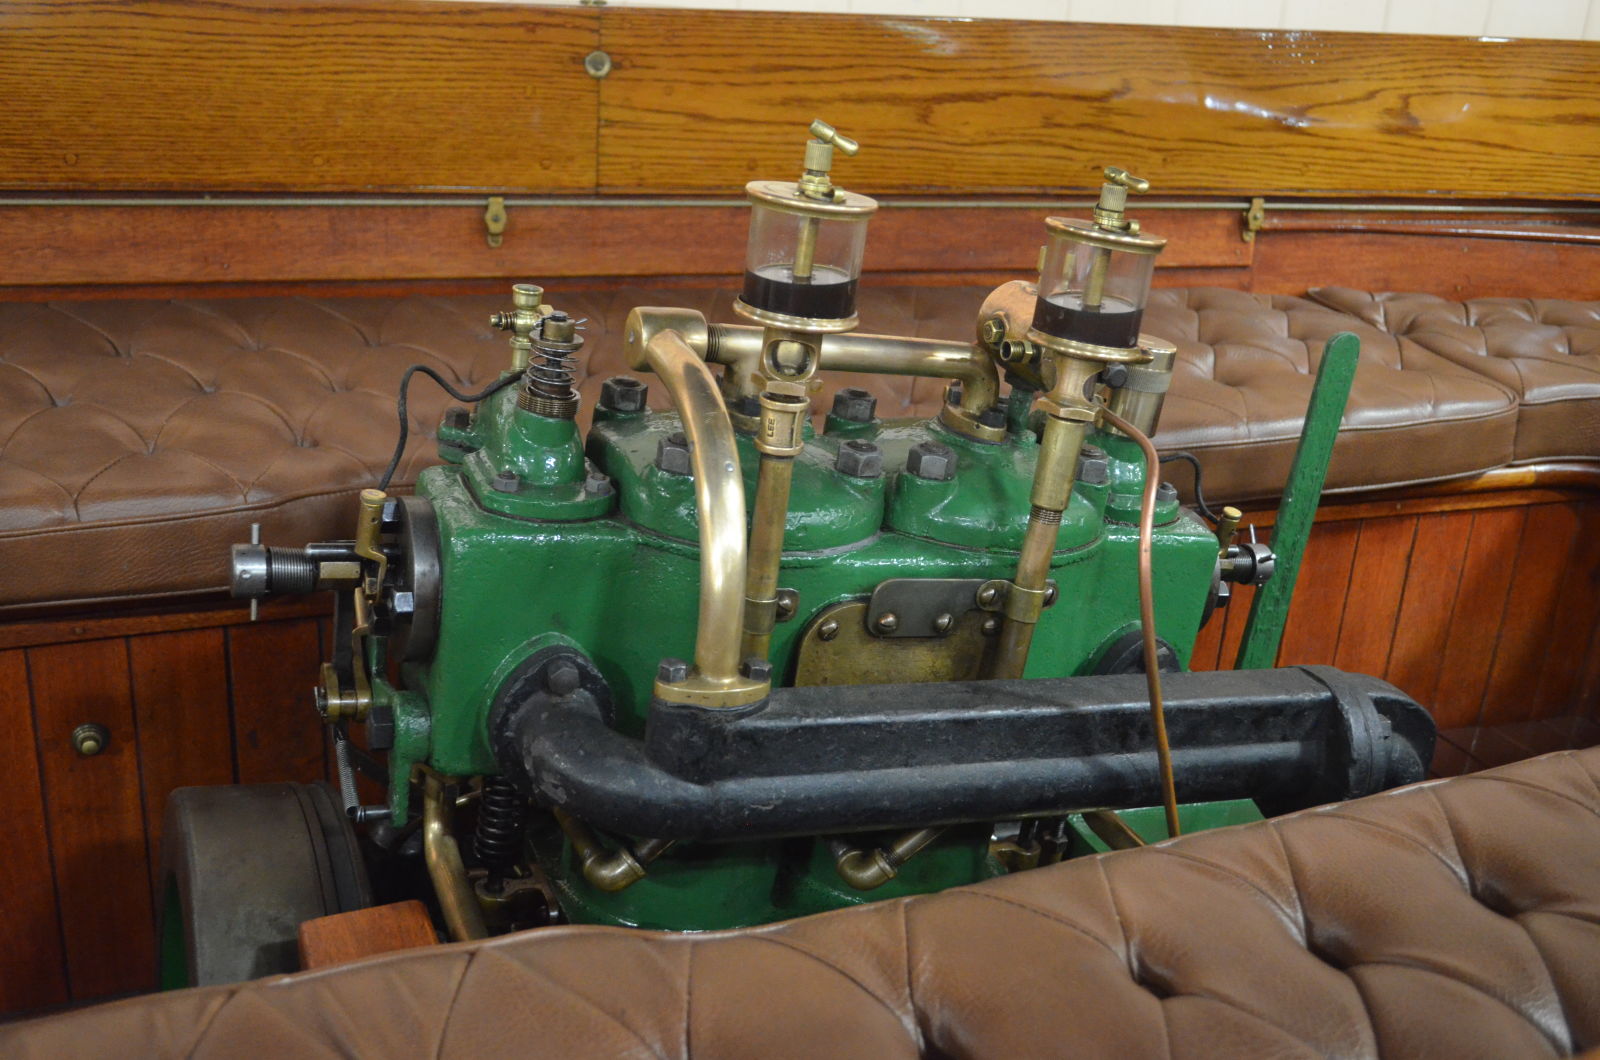 Union Marine engine from 1910. I wish all modern engines could be this pretty.